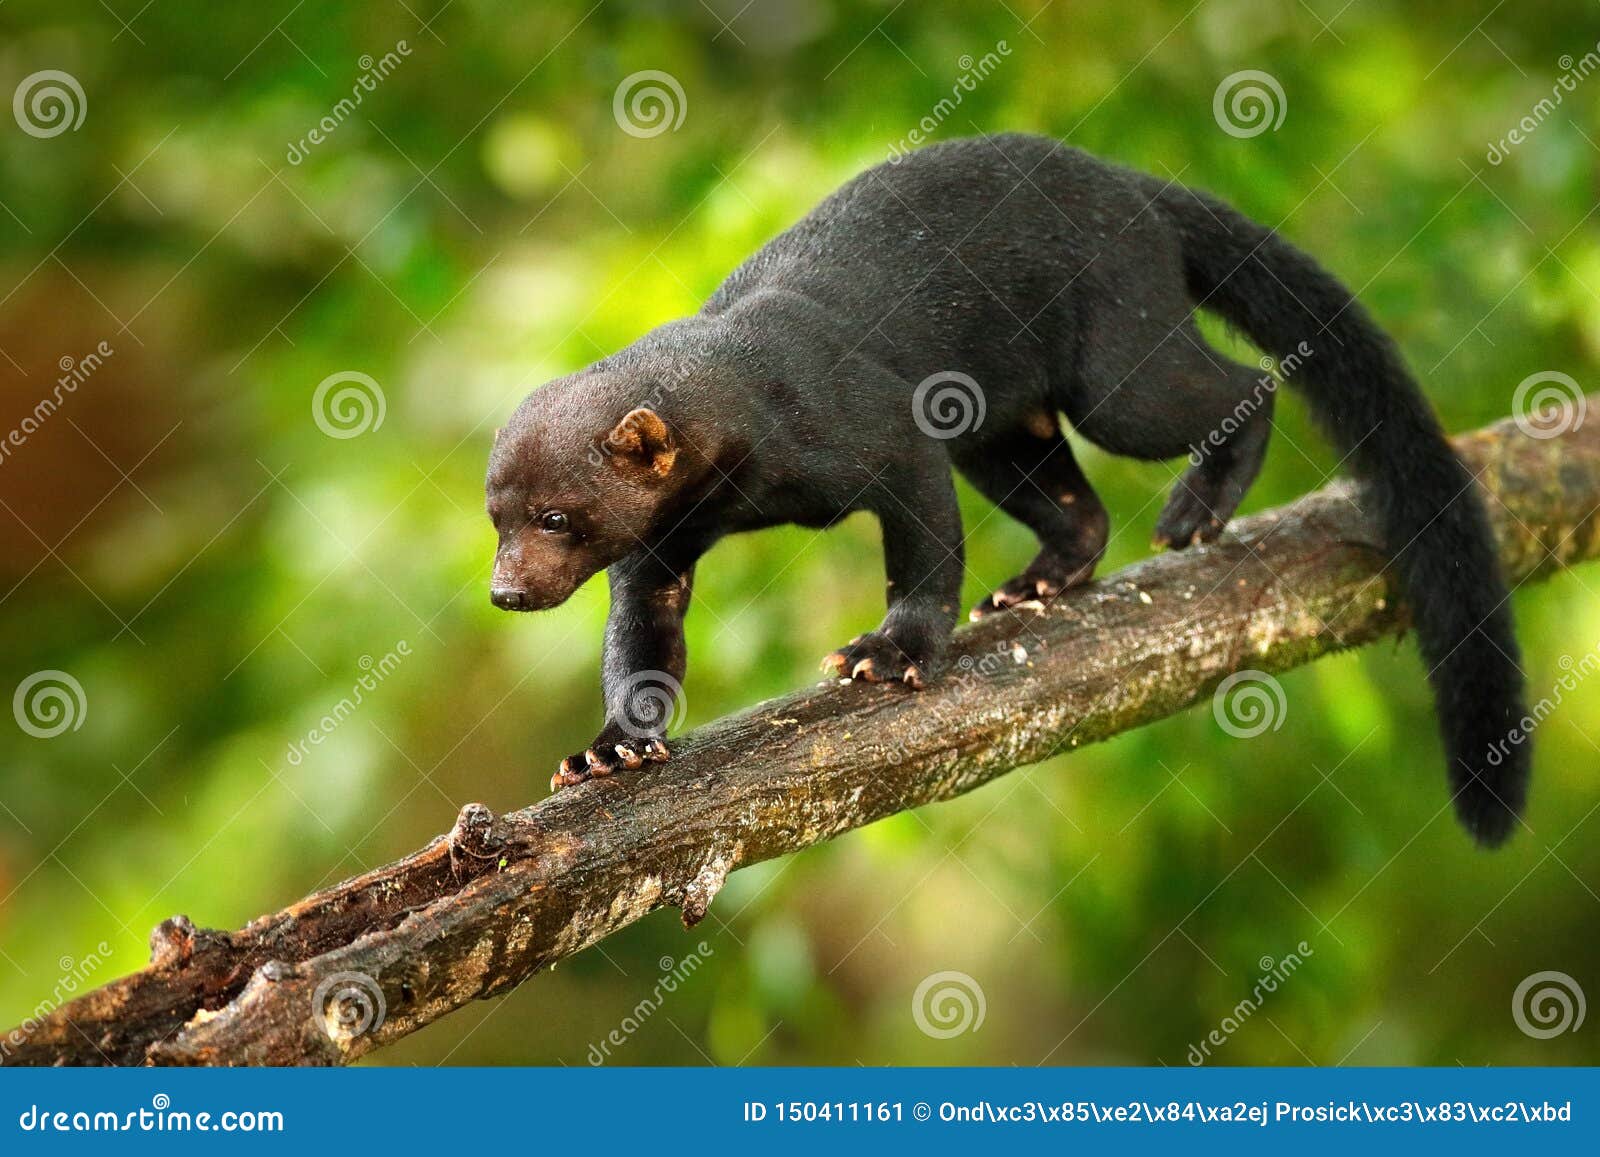 tayra, eira barbara, omnivorous animal from the weasel family. tayra hidden in tropic forest, sitting on the green tree. wildlife